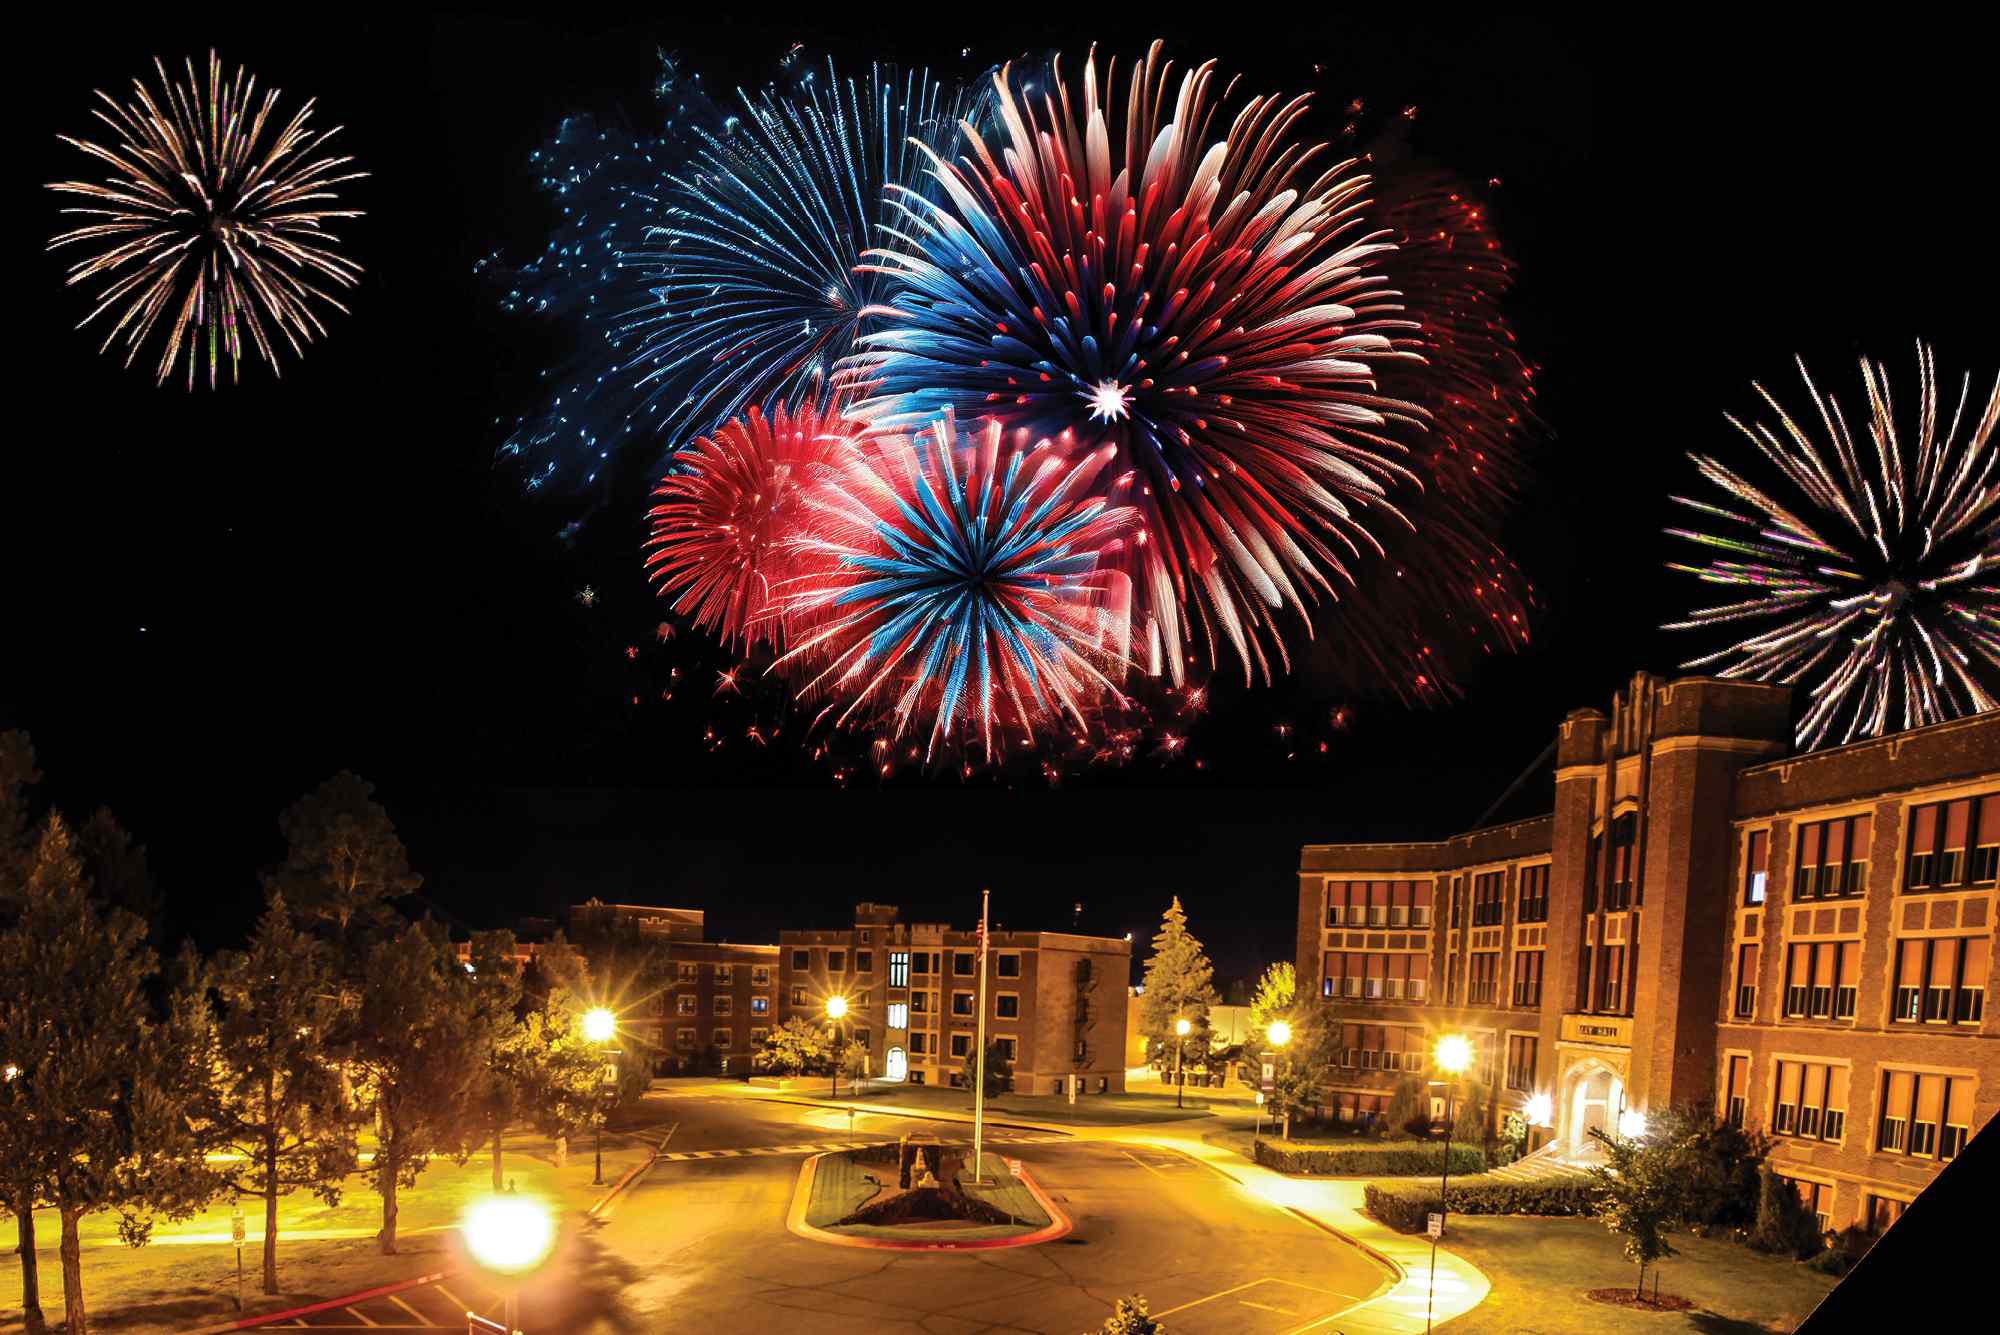 Fireworks at night on the DSU Campus